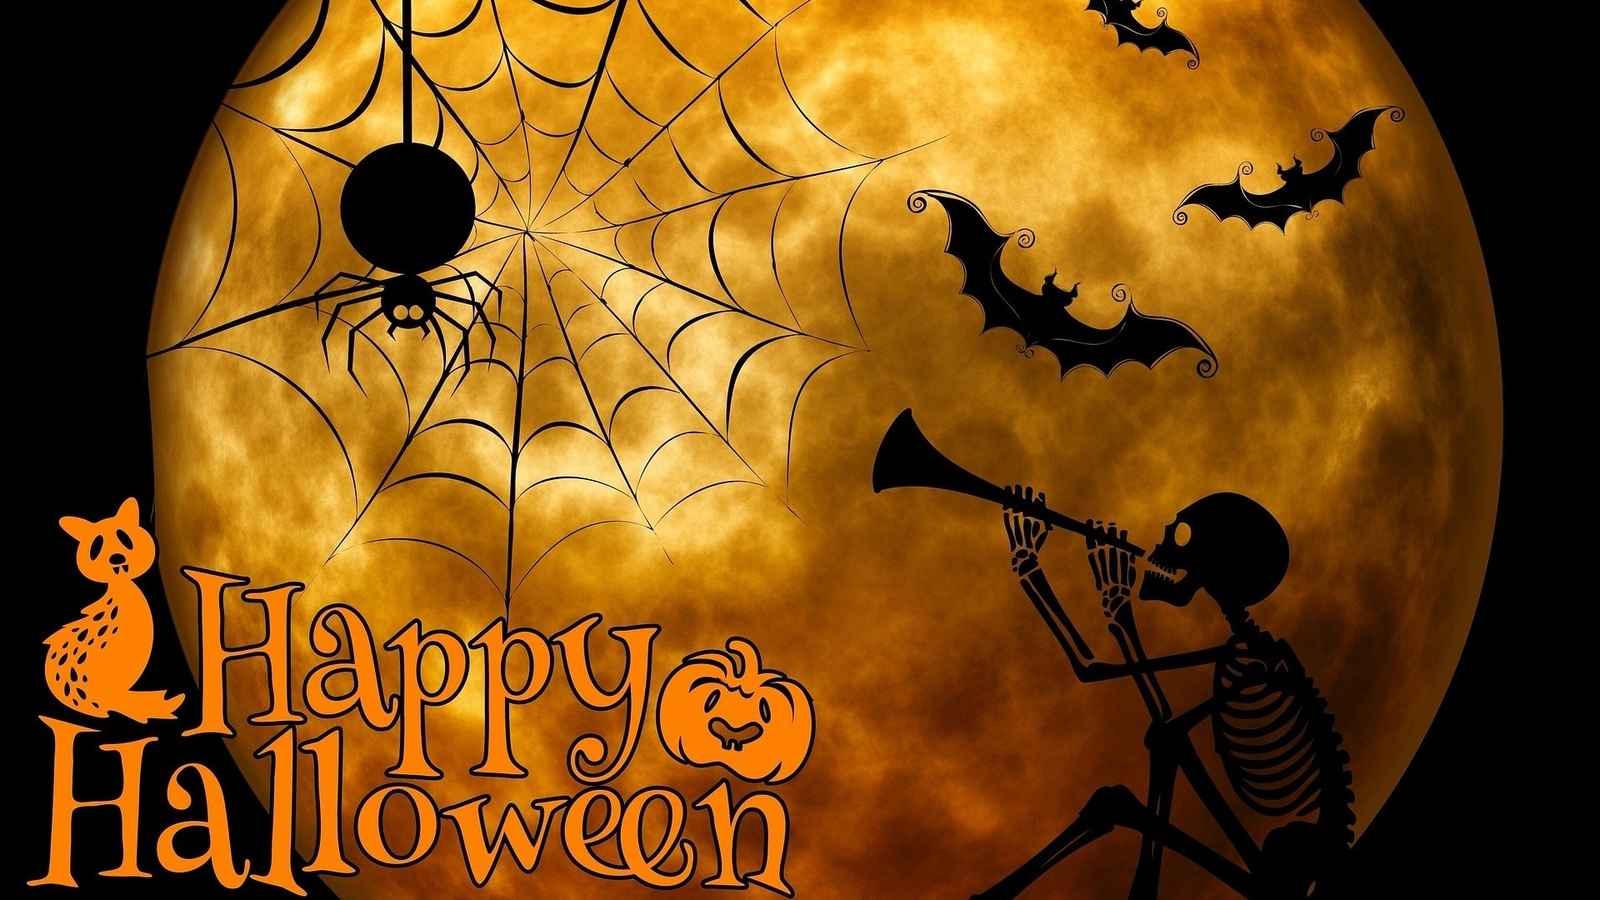 Happy Halloween 2021 Wishes, images, greetings and messages to send